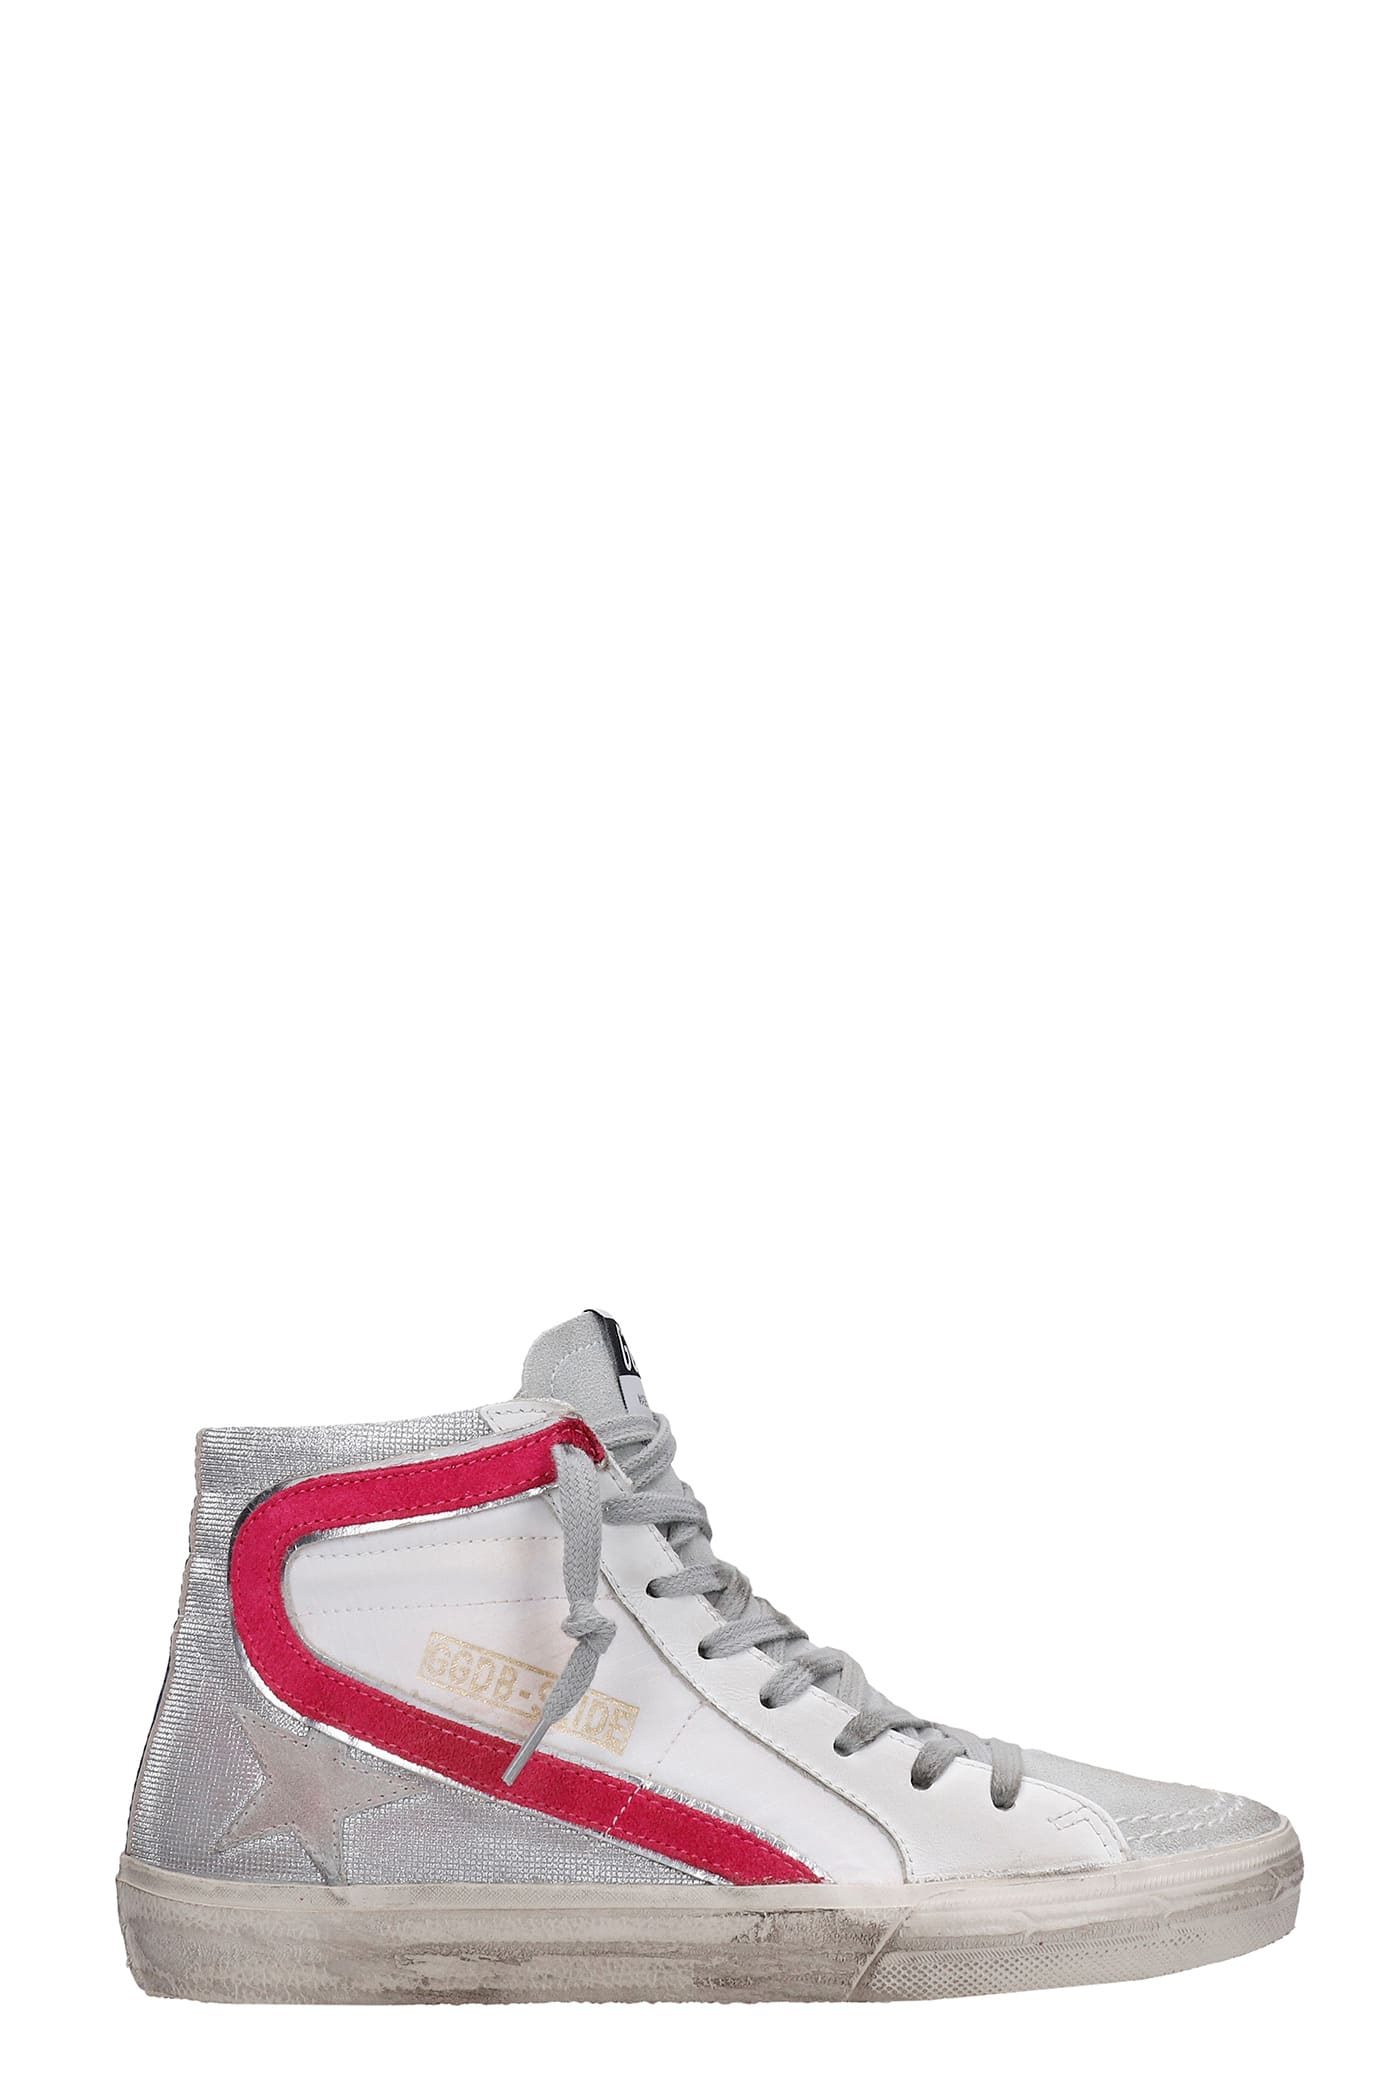 Golden Goose Slide Sneakers In White Suede And Leather